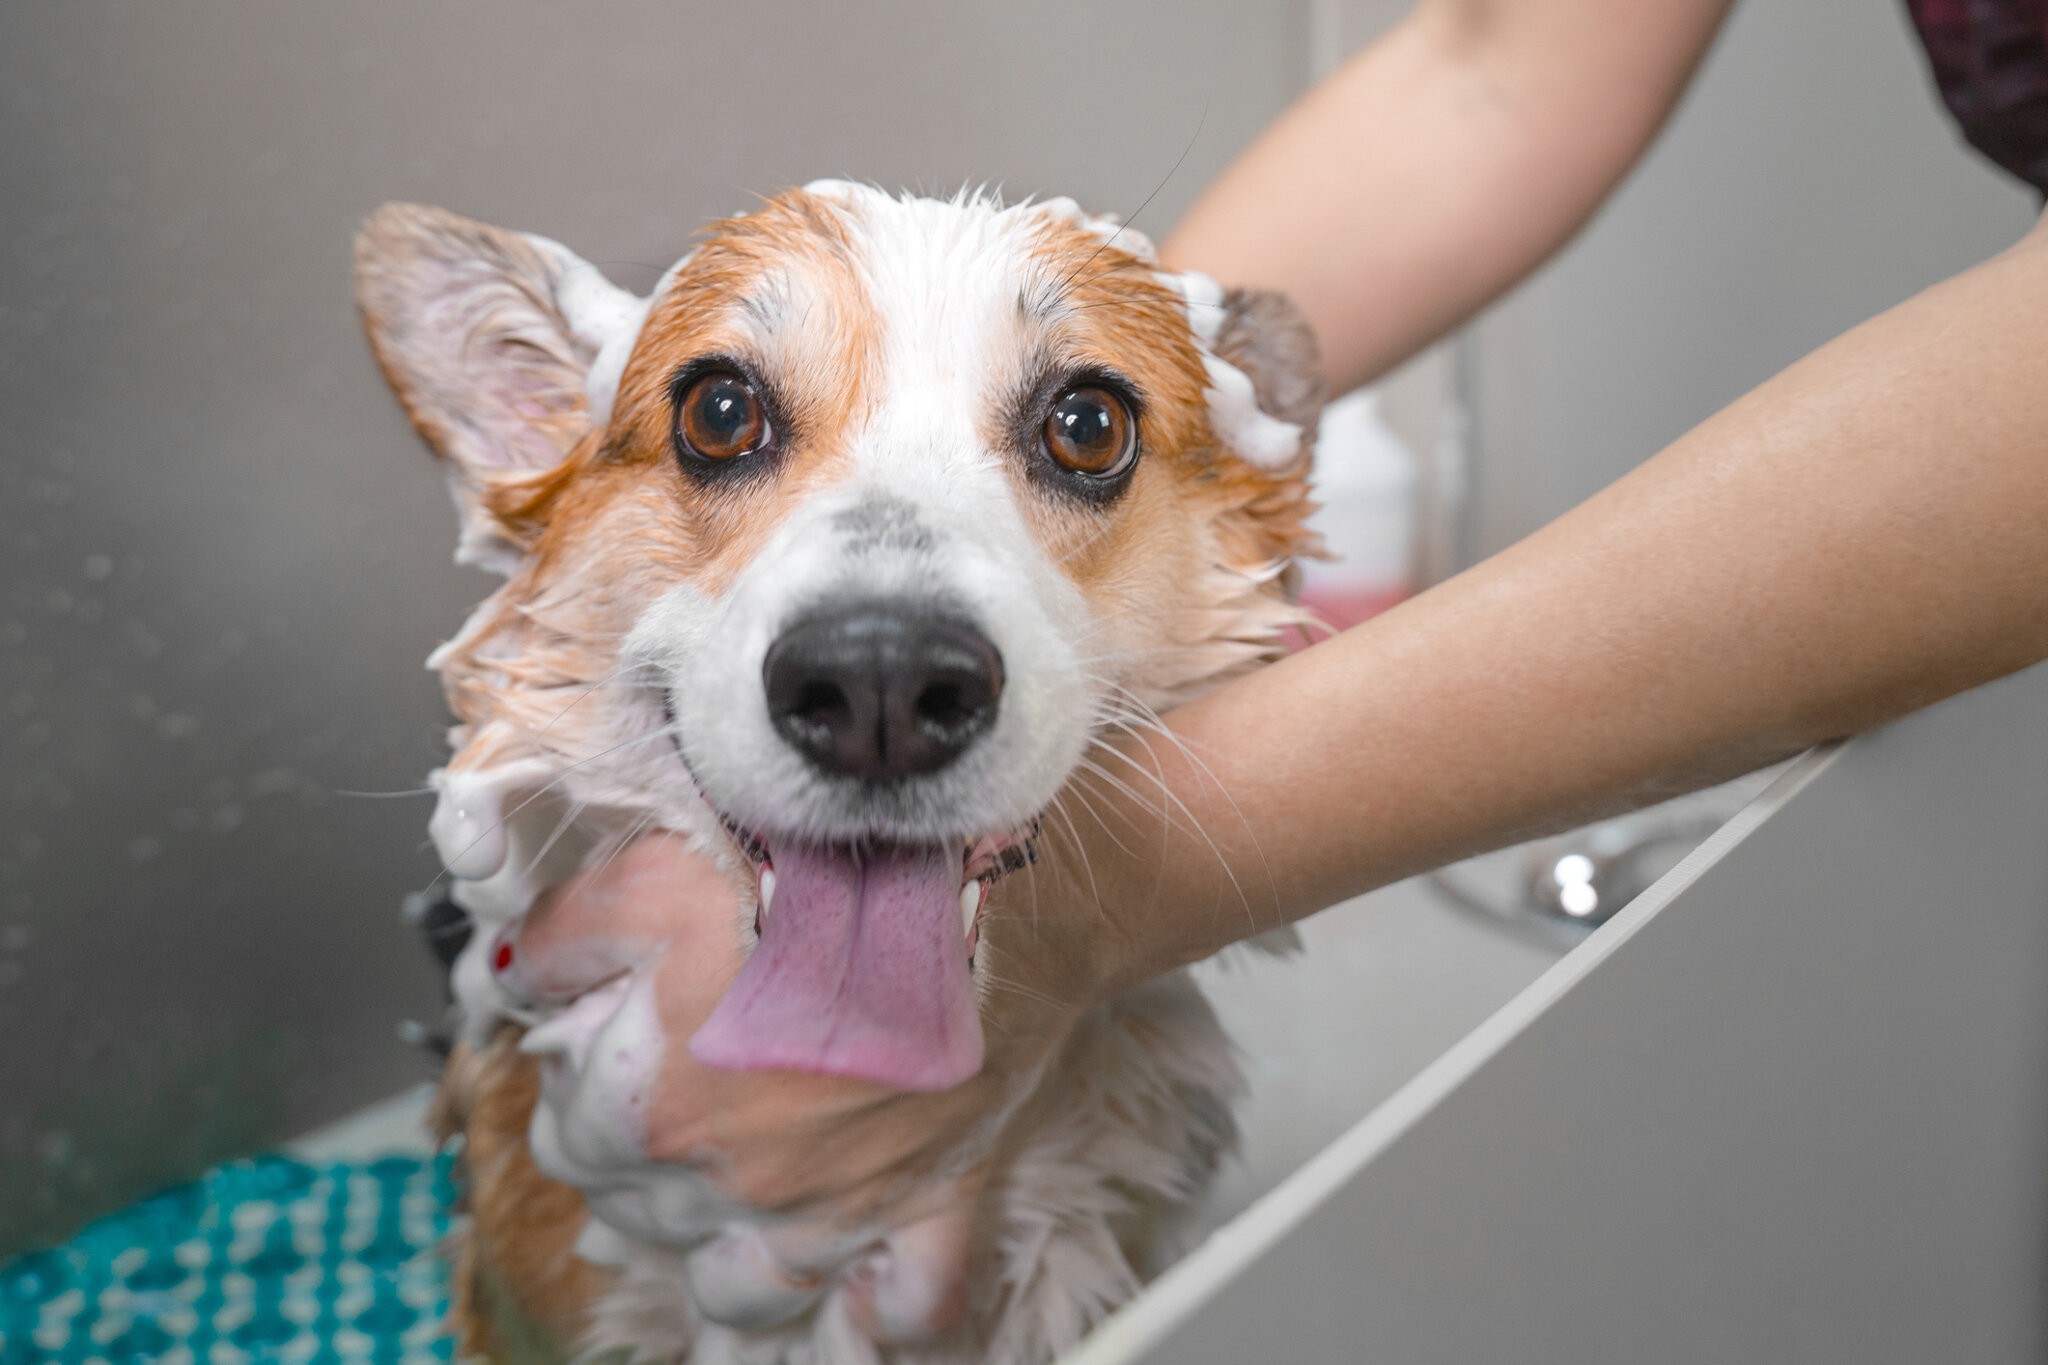 Funny portrait of a welsh corgi pembroke dog showering with shampoo. Dog taking a bubble bath in pet grooming salon.